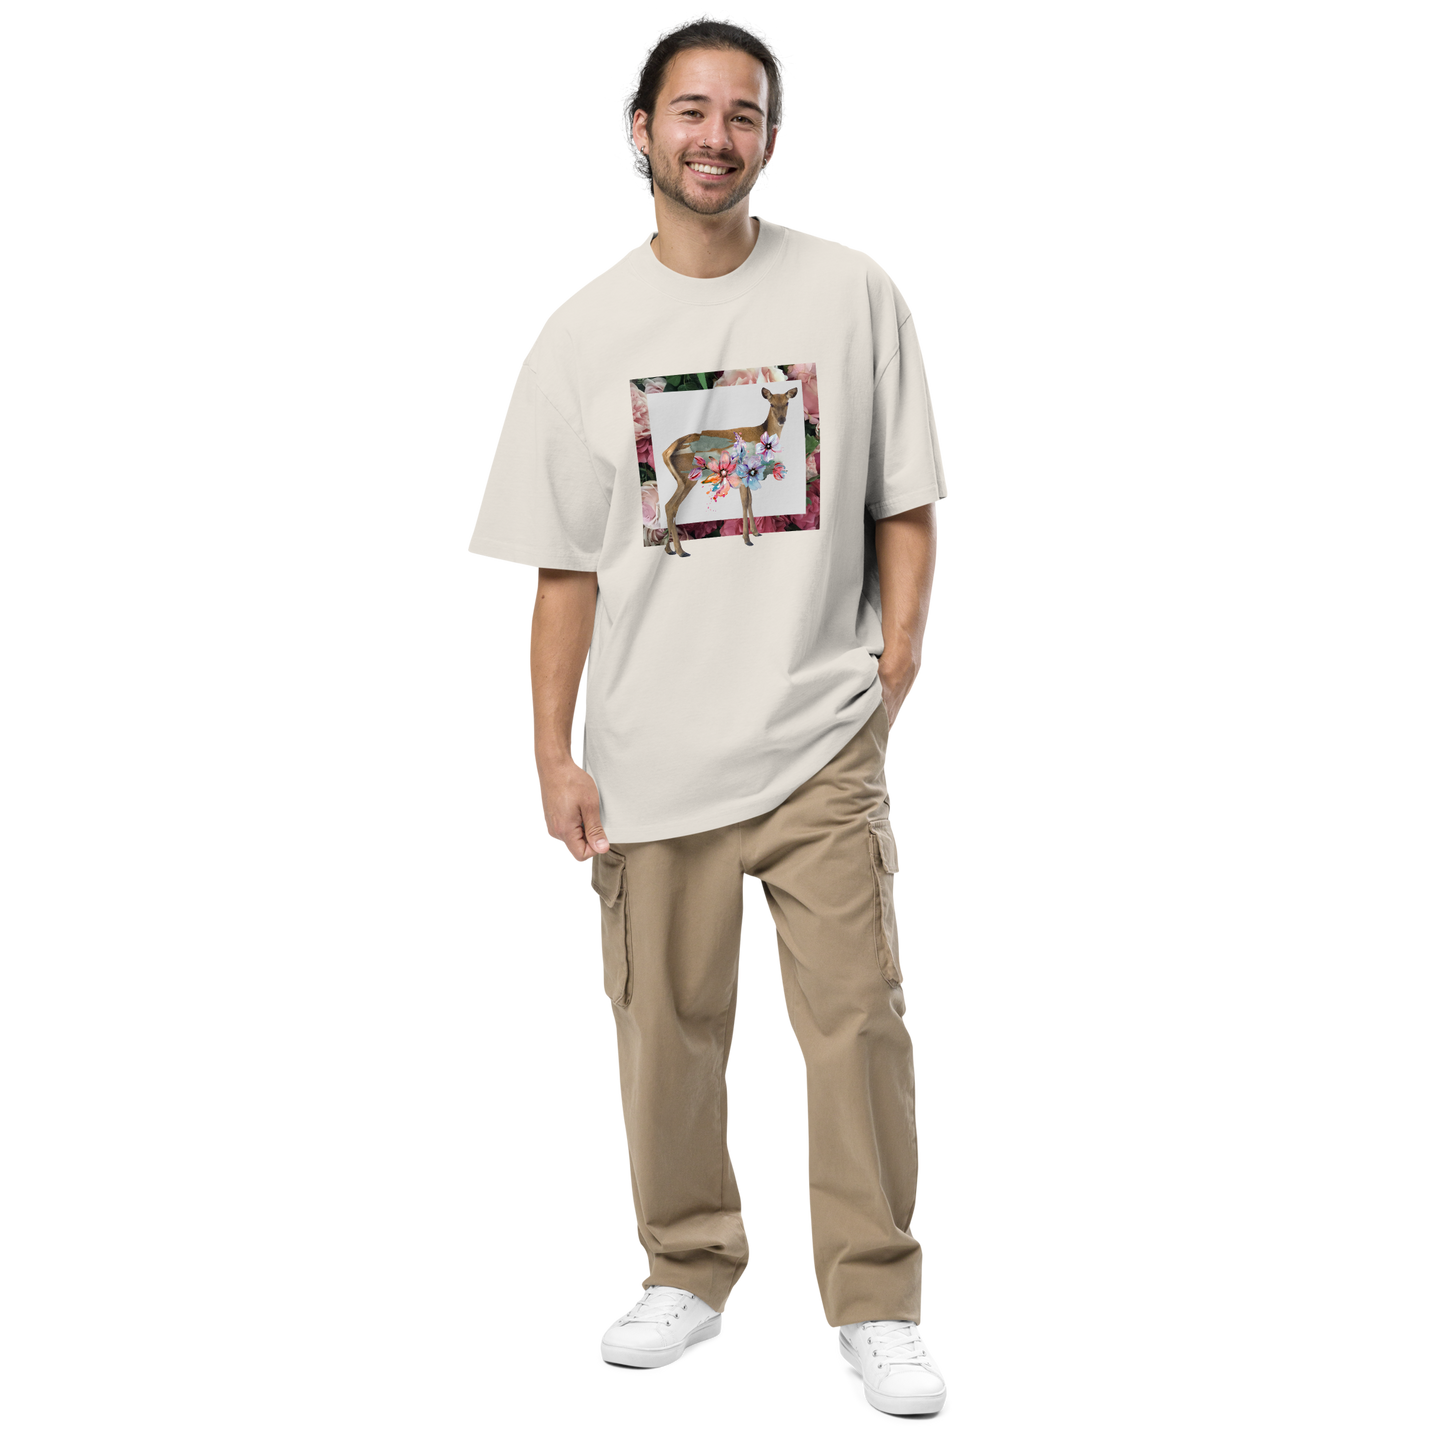 Smiling man wearing a Faded Bone Deer Oversized T-Shirt featuring a captivating Floral Deer graphic on the chest - Cute Graphic Deer Oversized Tees - Boozy Fox